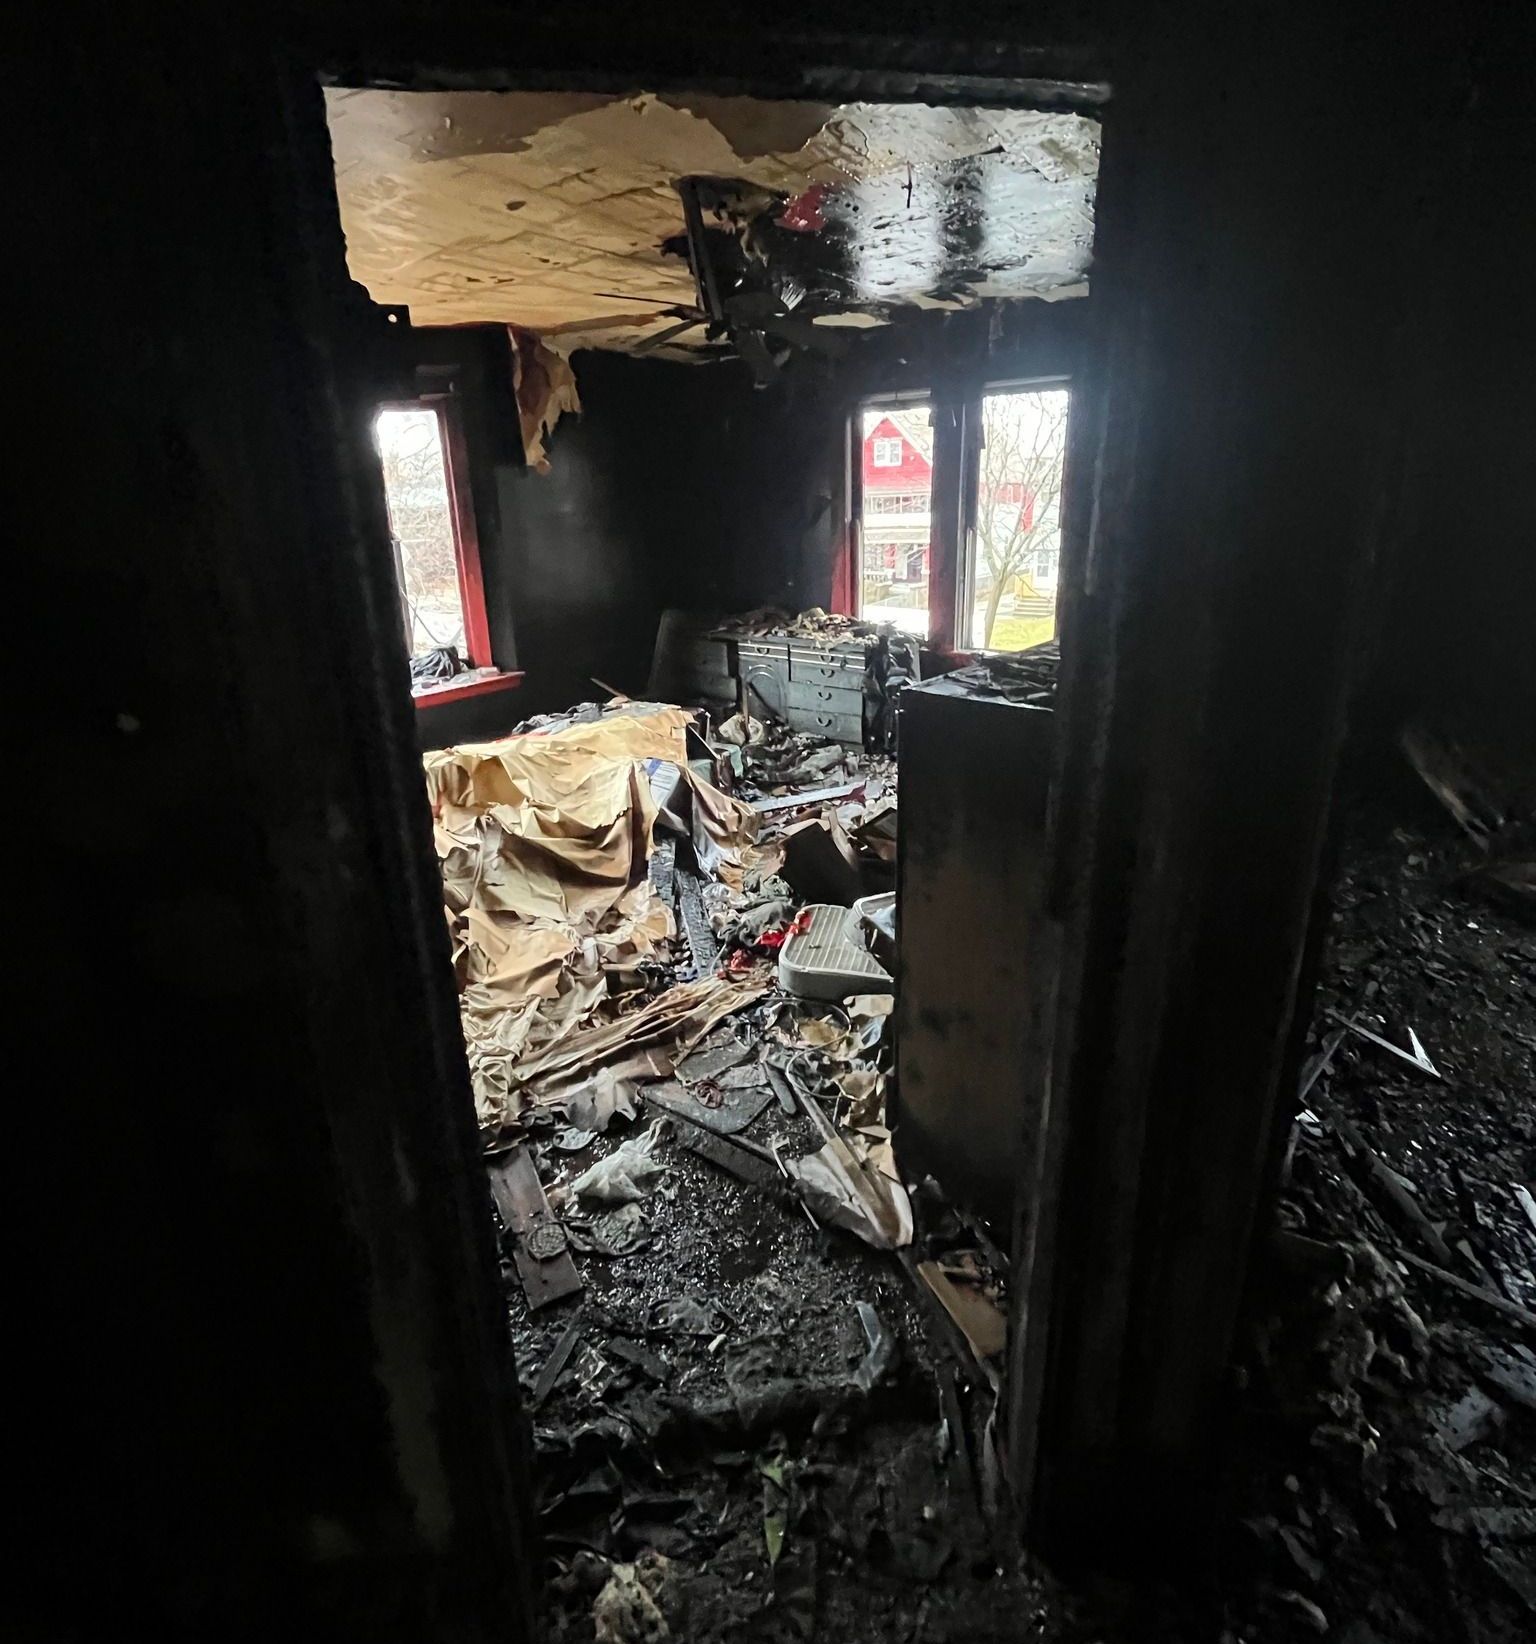 A fire-ravaged bedroom with almost nothing recognizable through the ashes that are left.  This requires a professional restoration company like Unified Restoration Systems